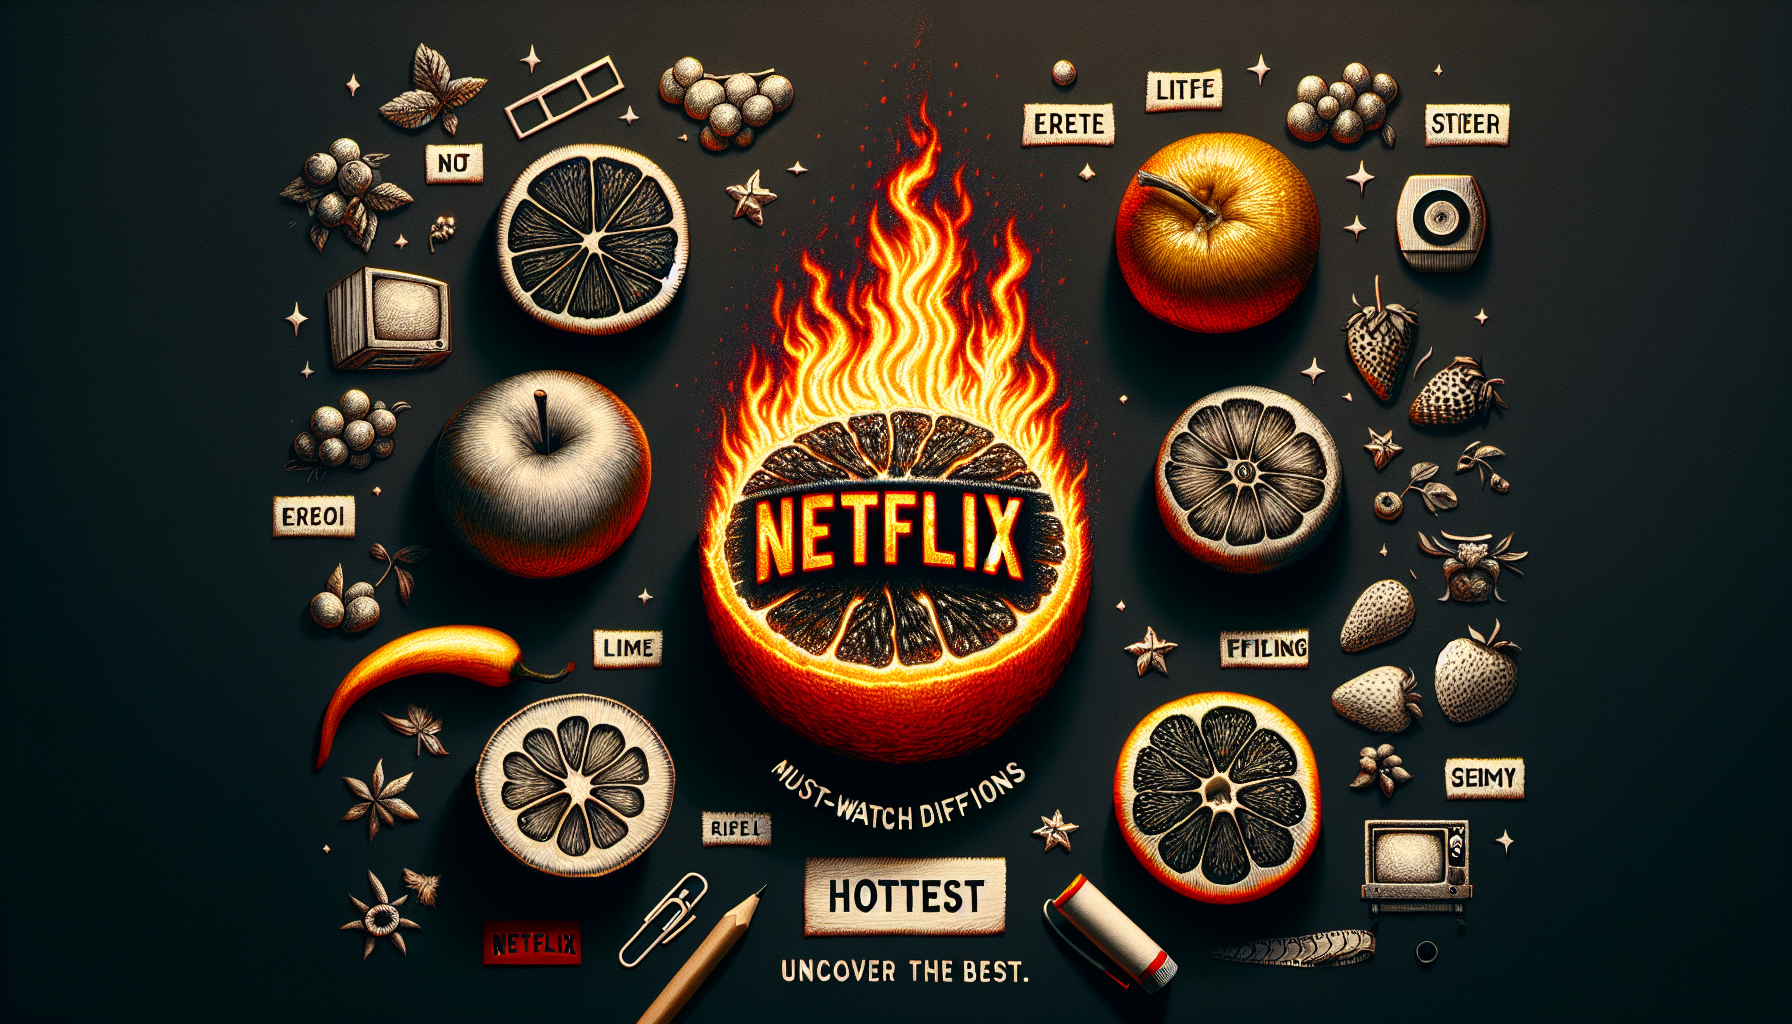 discover the top 10 hottest netflix movies trending right now and make sure you're not missing out on the latest must-watch films. stay up-to-date with the most popular movies on netflix and never miss a blockbuster!